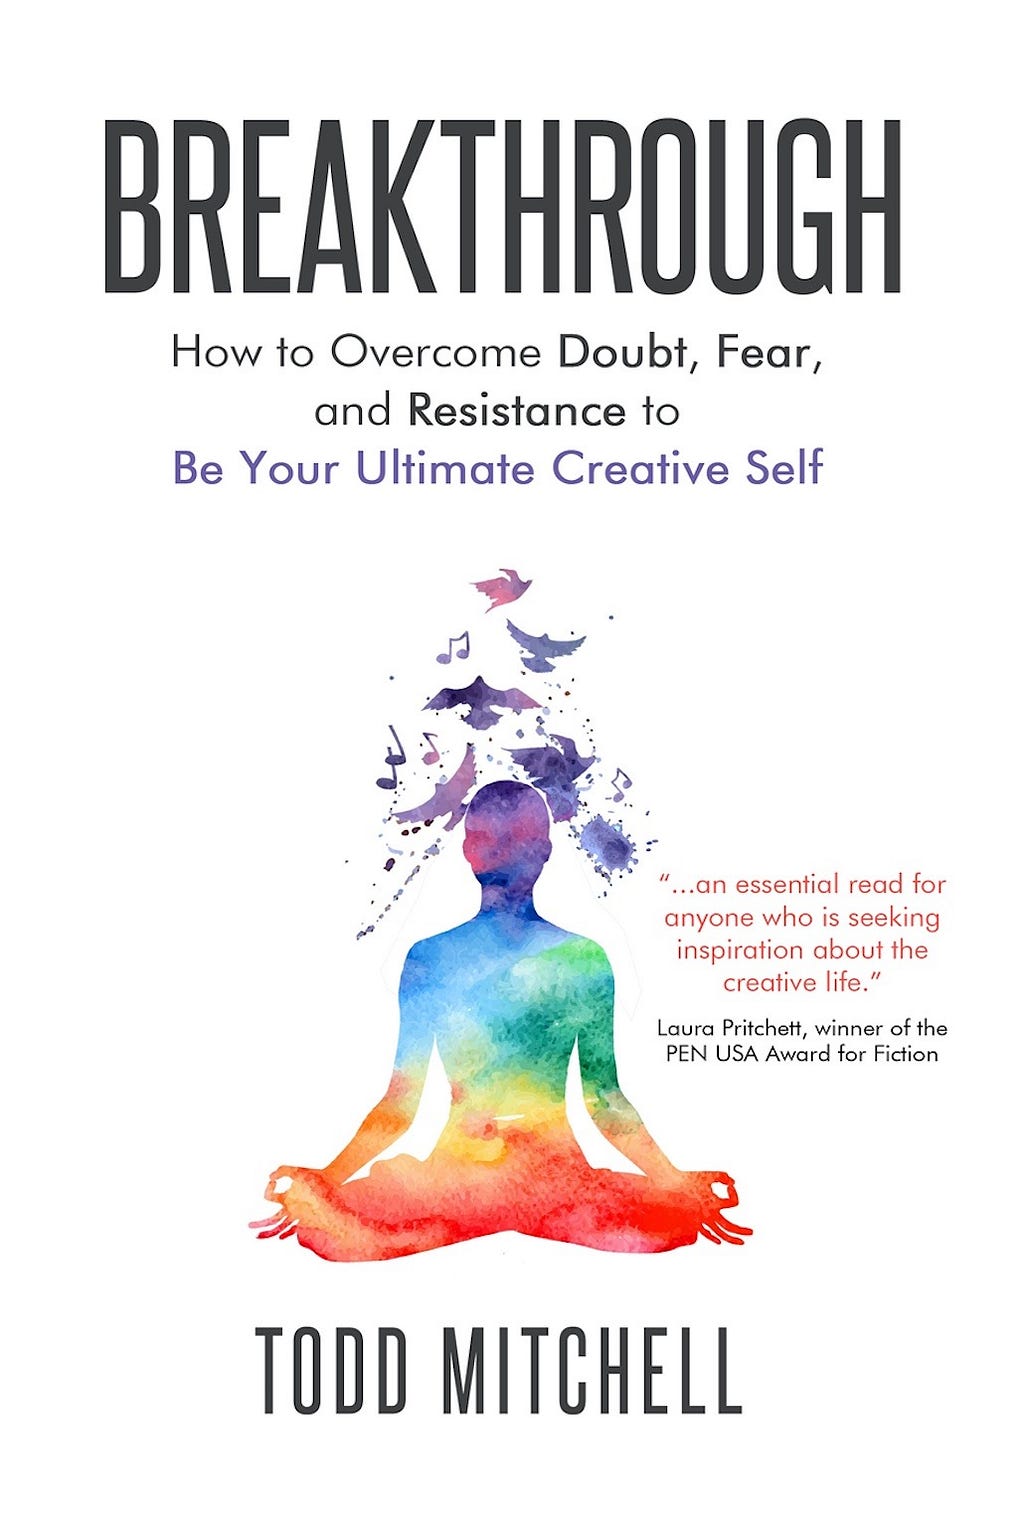 Breakthrough cover, published by Owl Hollow Press